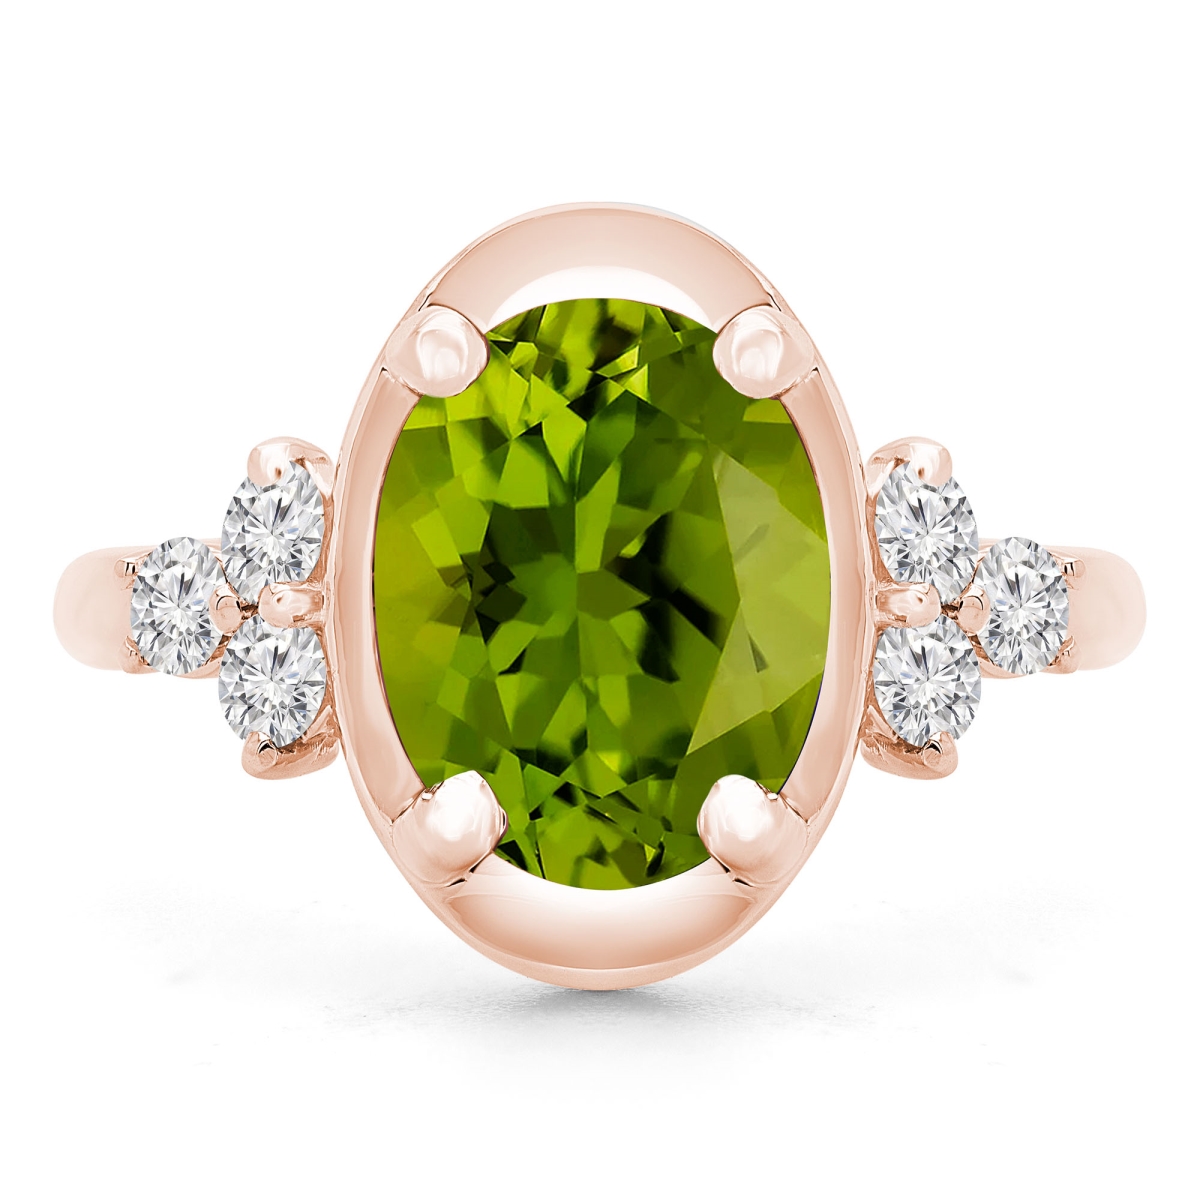 Picture of Majesty Diamonds MD190412-7 3.9 CTW Oval Green Peridot Cocktail Ring in 14K Rose Gold - Size 7